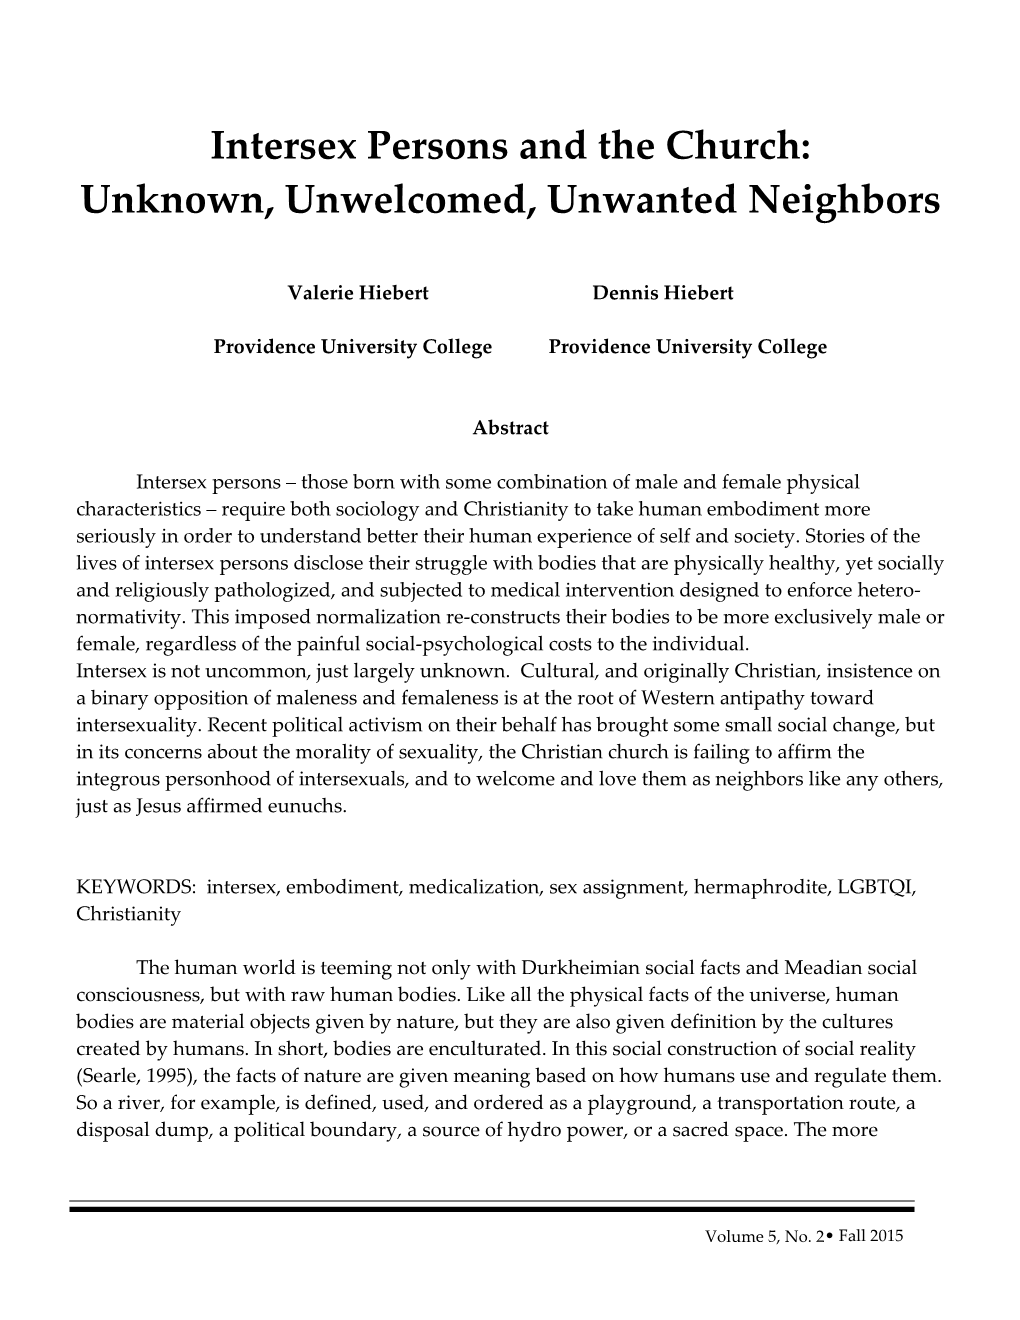 Intersex Persons and the Church: Unknown, Unwelcomed, Unwanted Neighbors